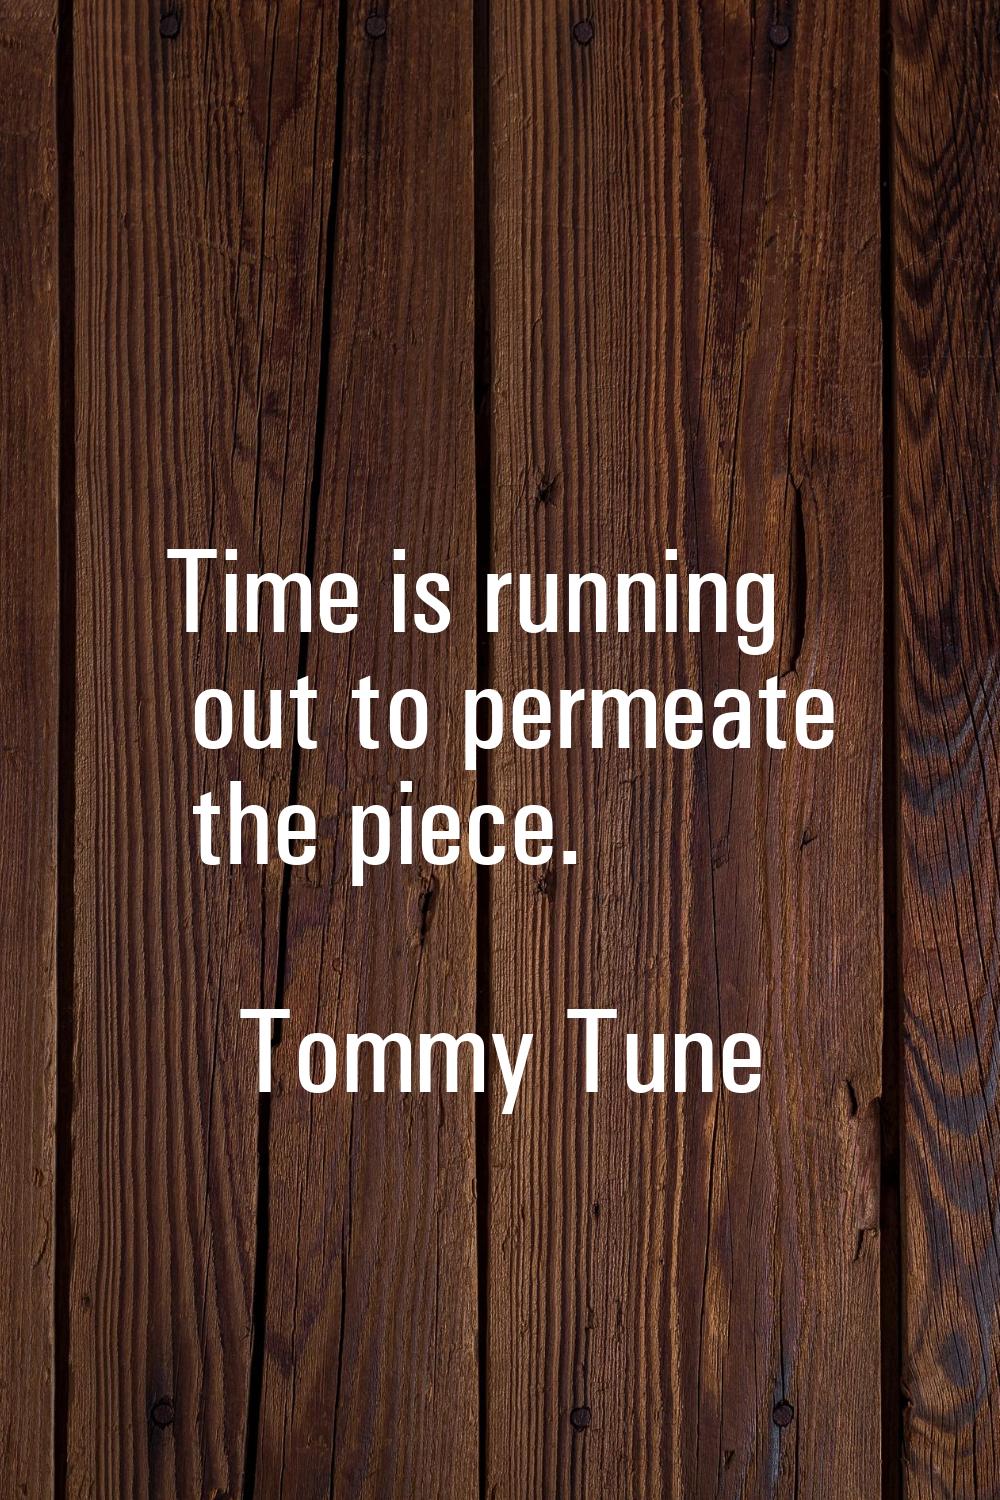 Time is running out to permeate the piece.